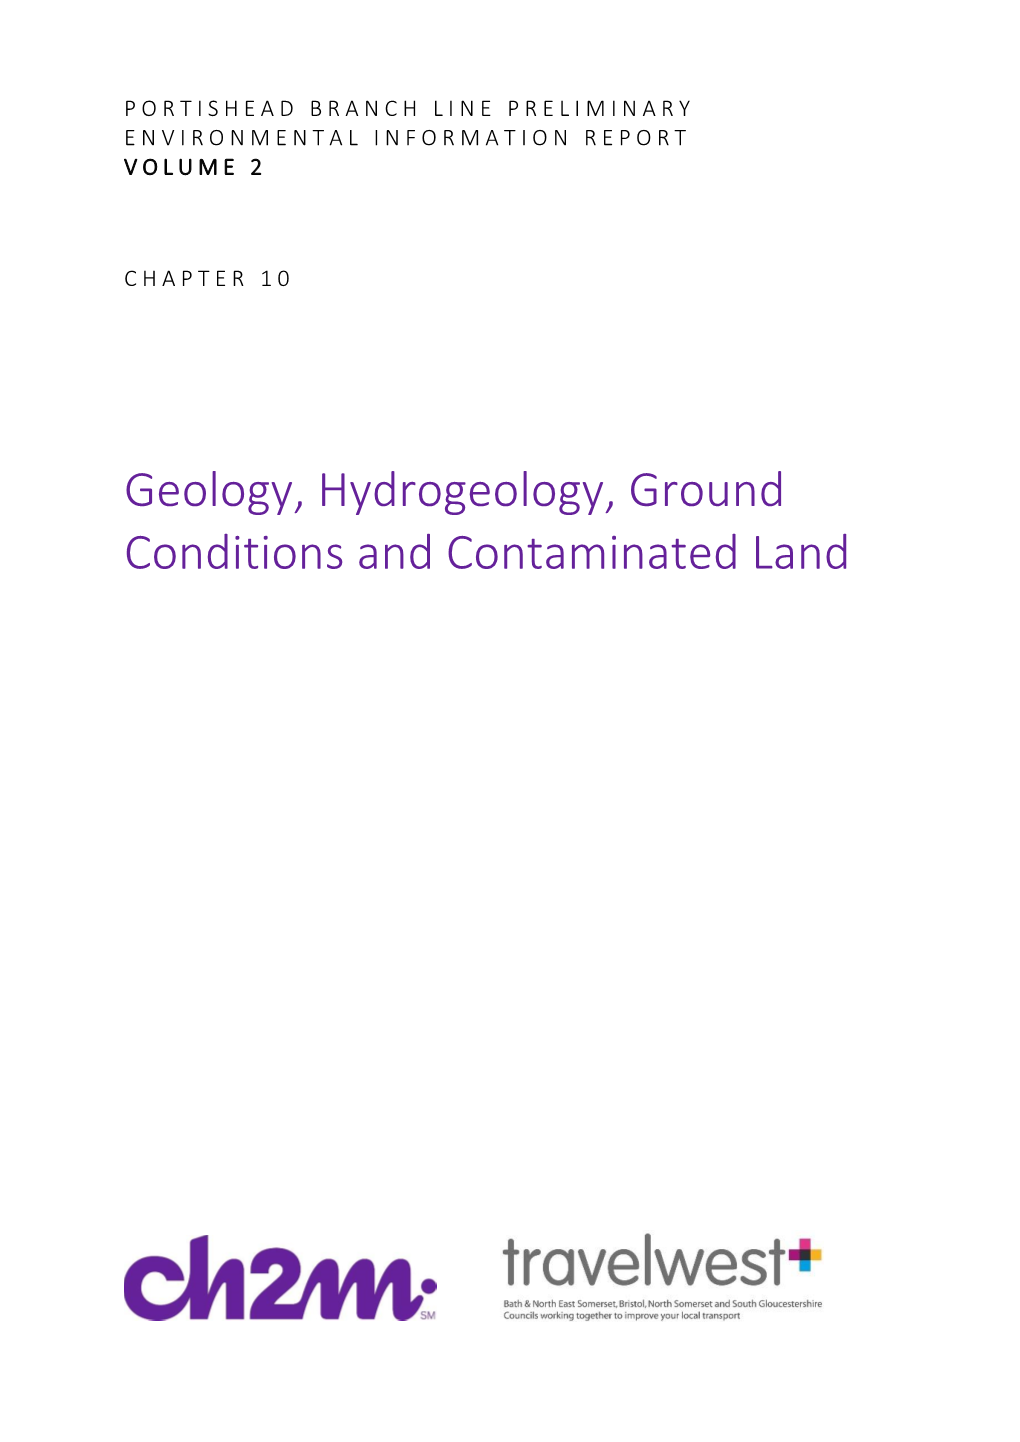 Geology, Hydrogeology, Ground Conditions and Contaminated Land